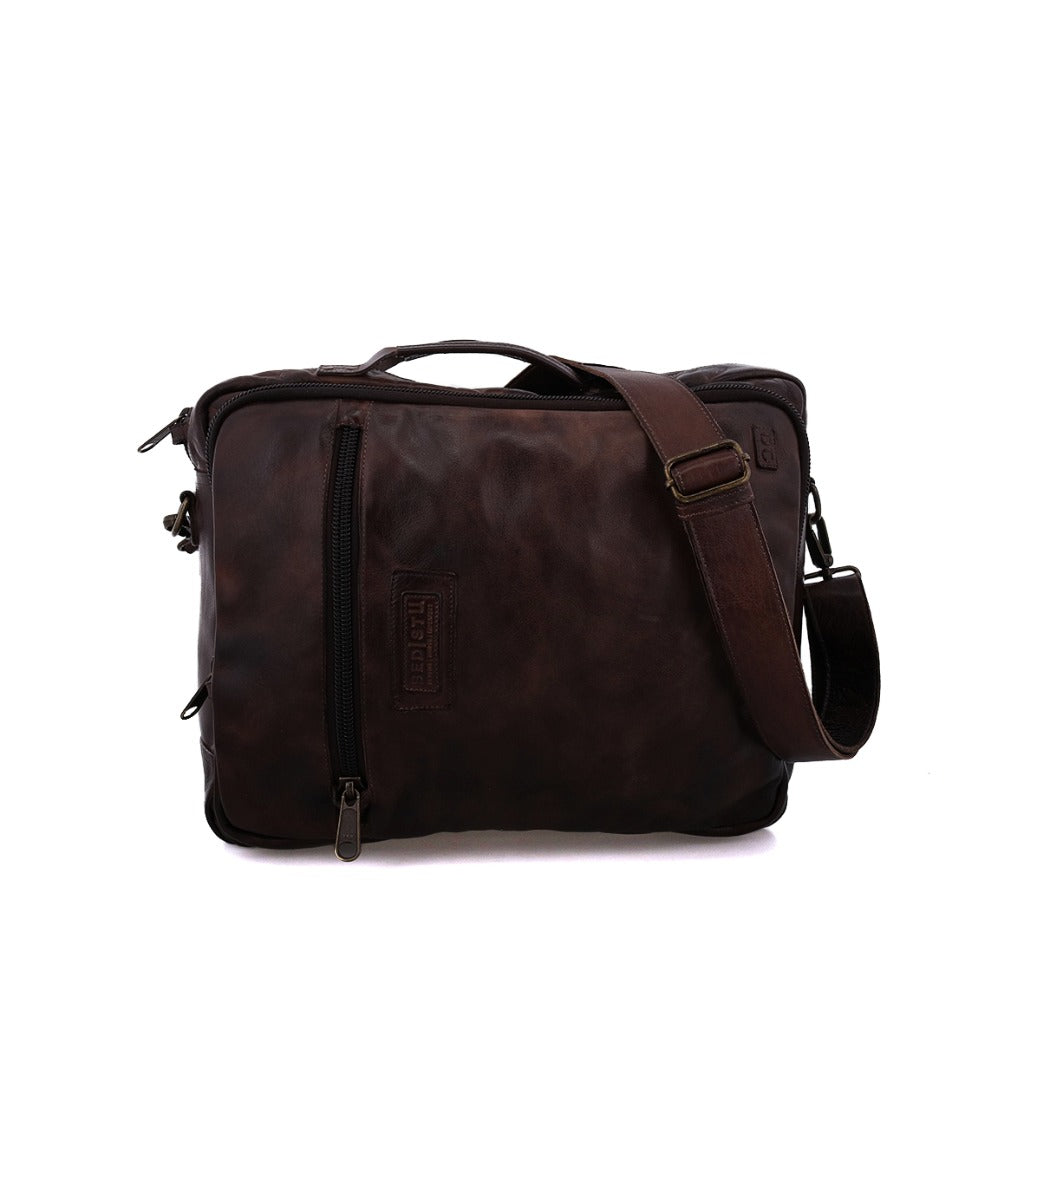 A brown leather Socrates messenger bag on a white background by Bed Stu.